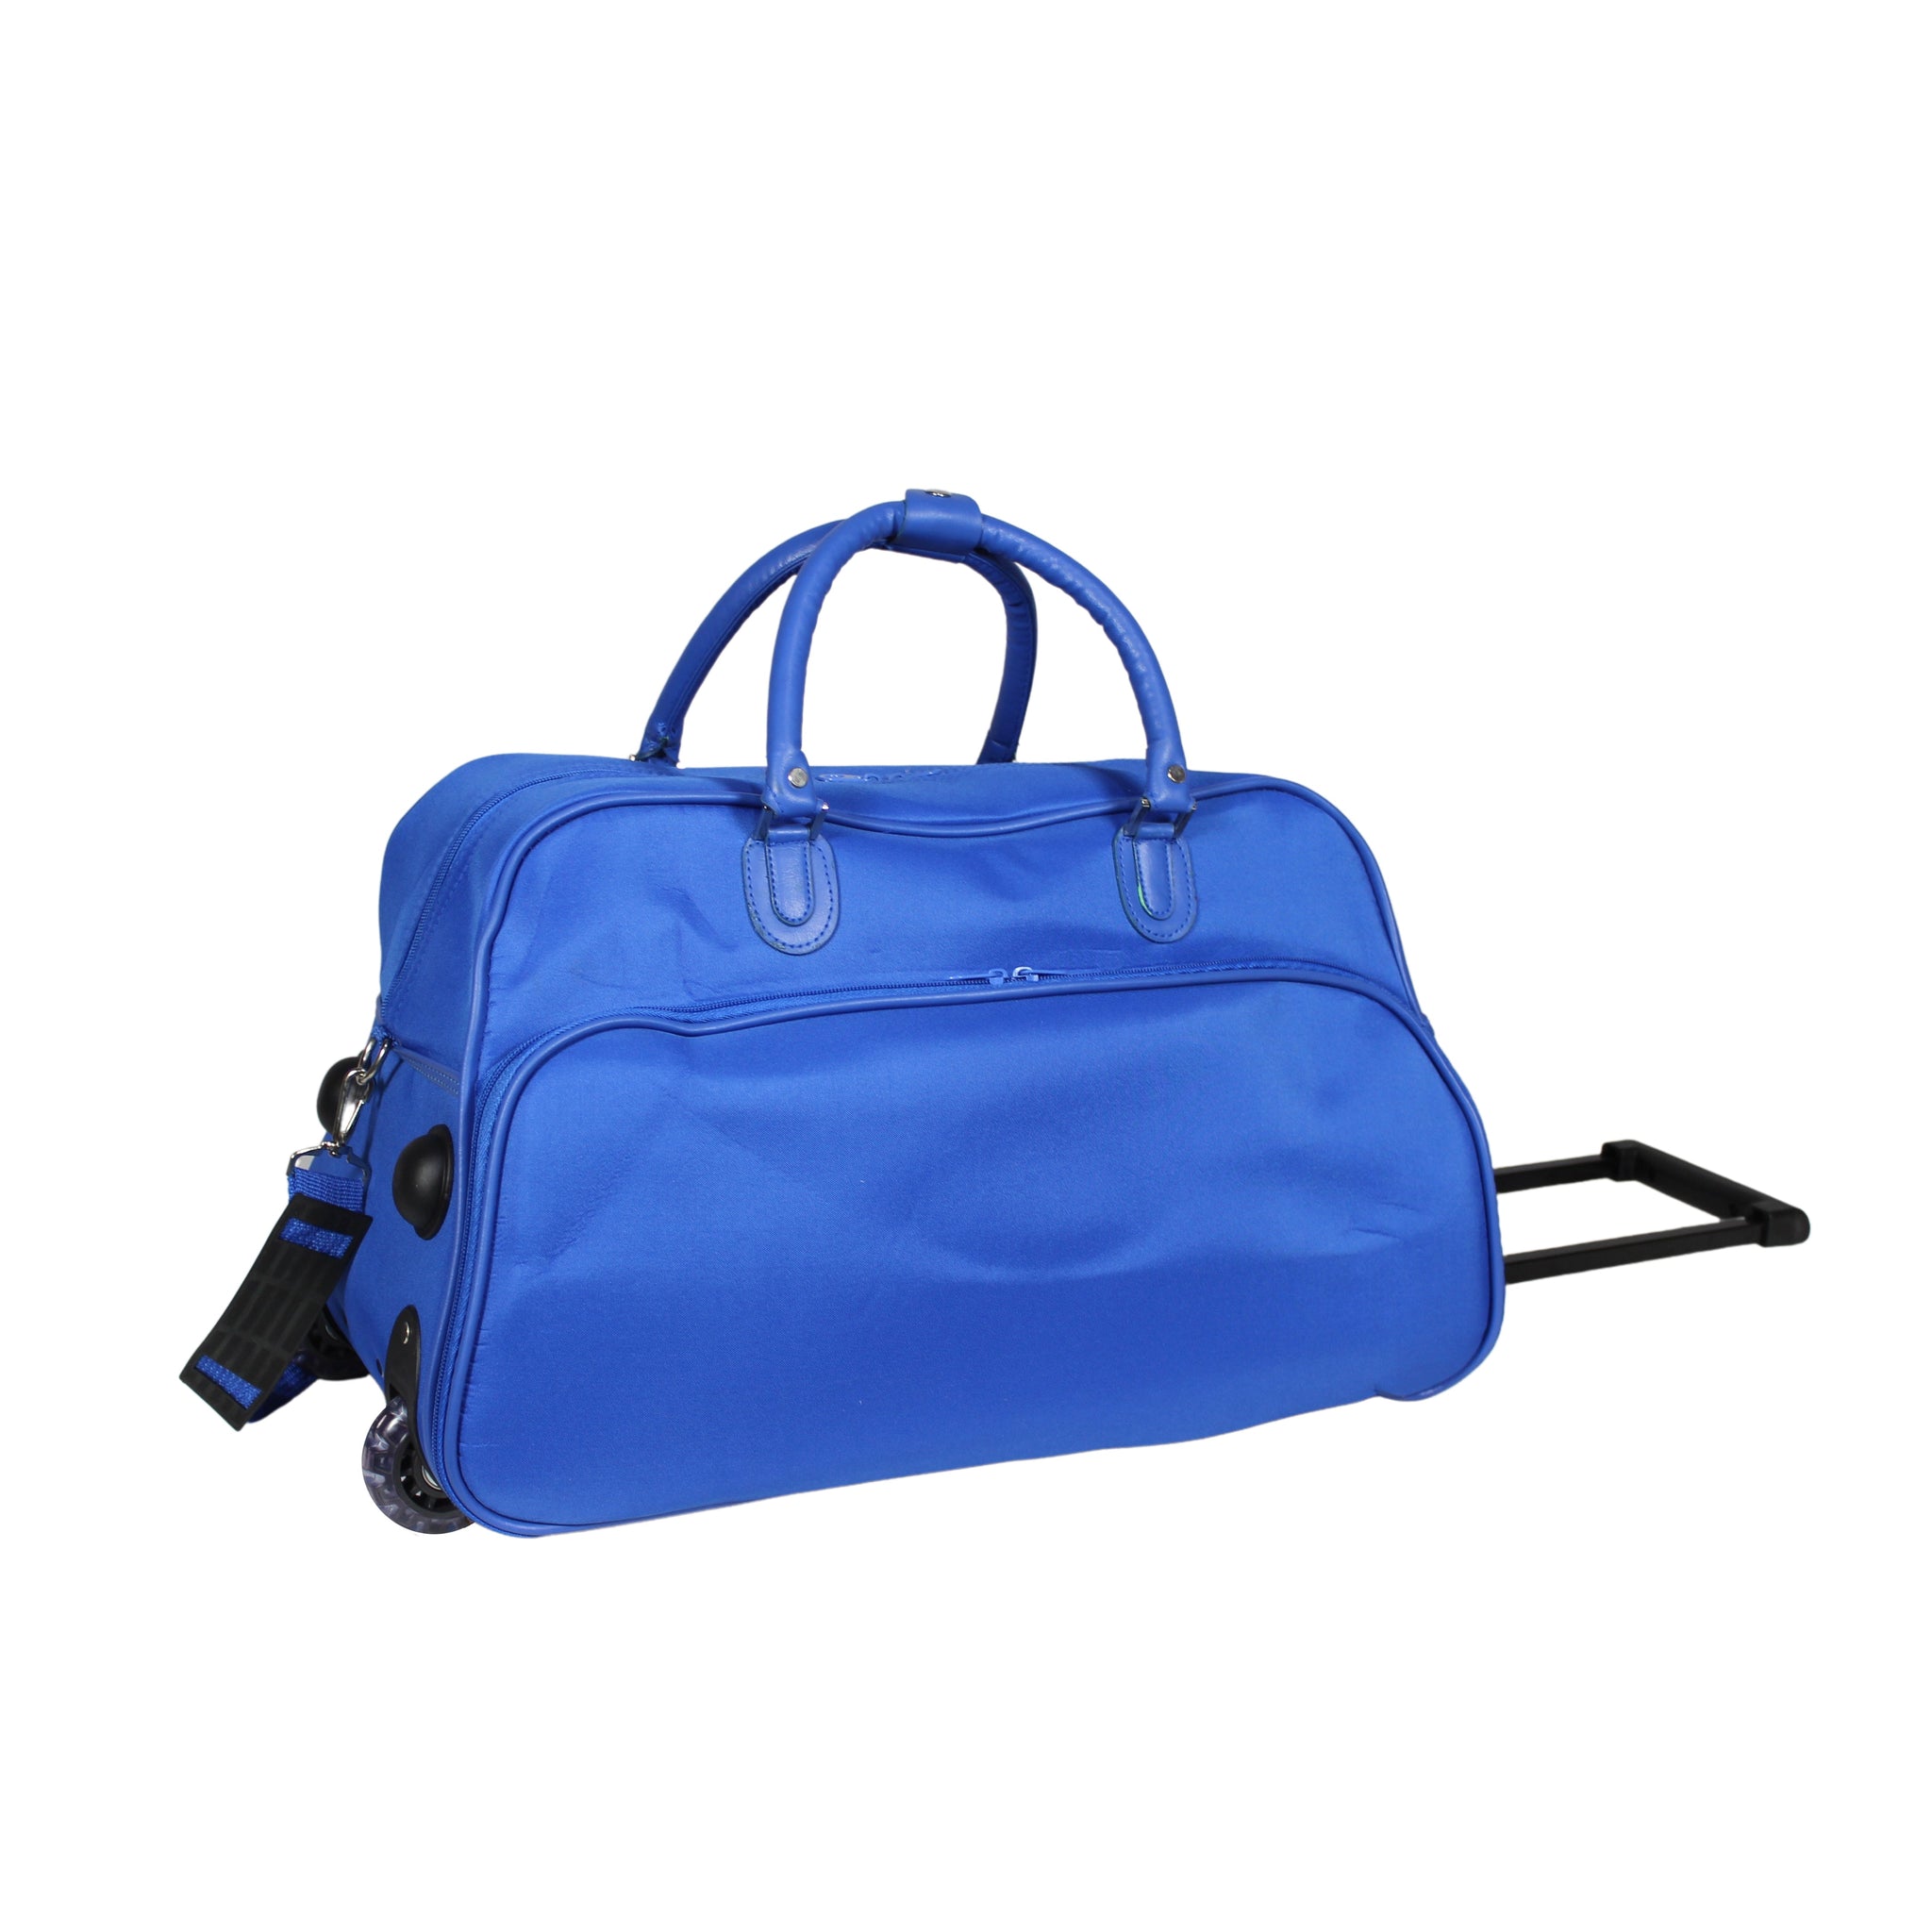 CalBags 21" Rolling Carry-On Duffel Bag - Royal Blue